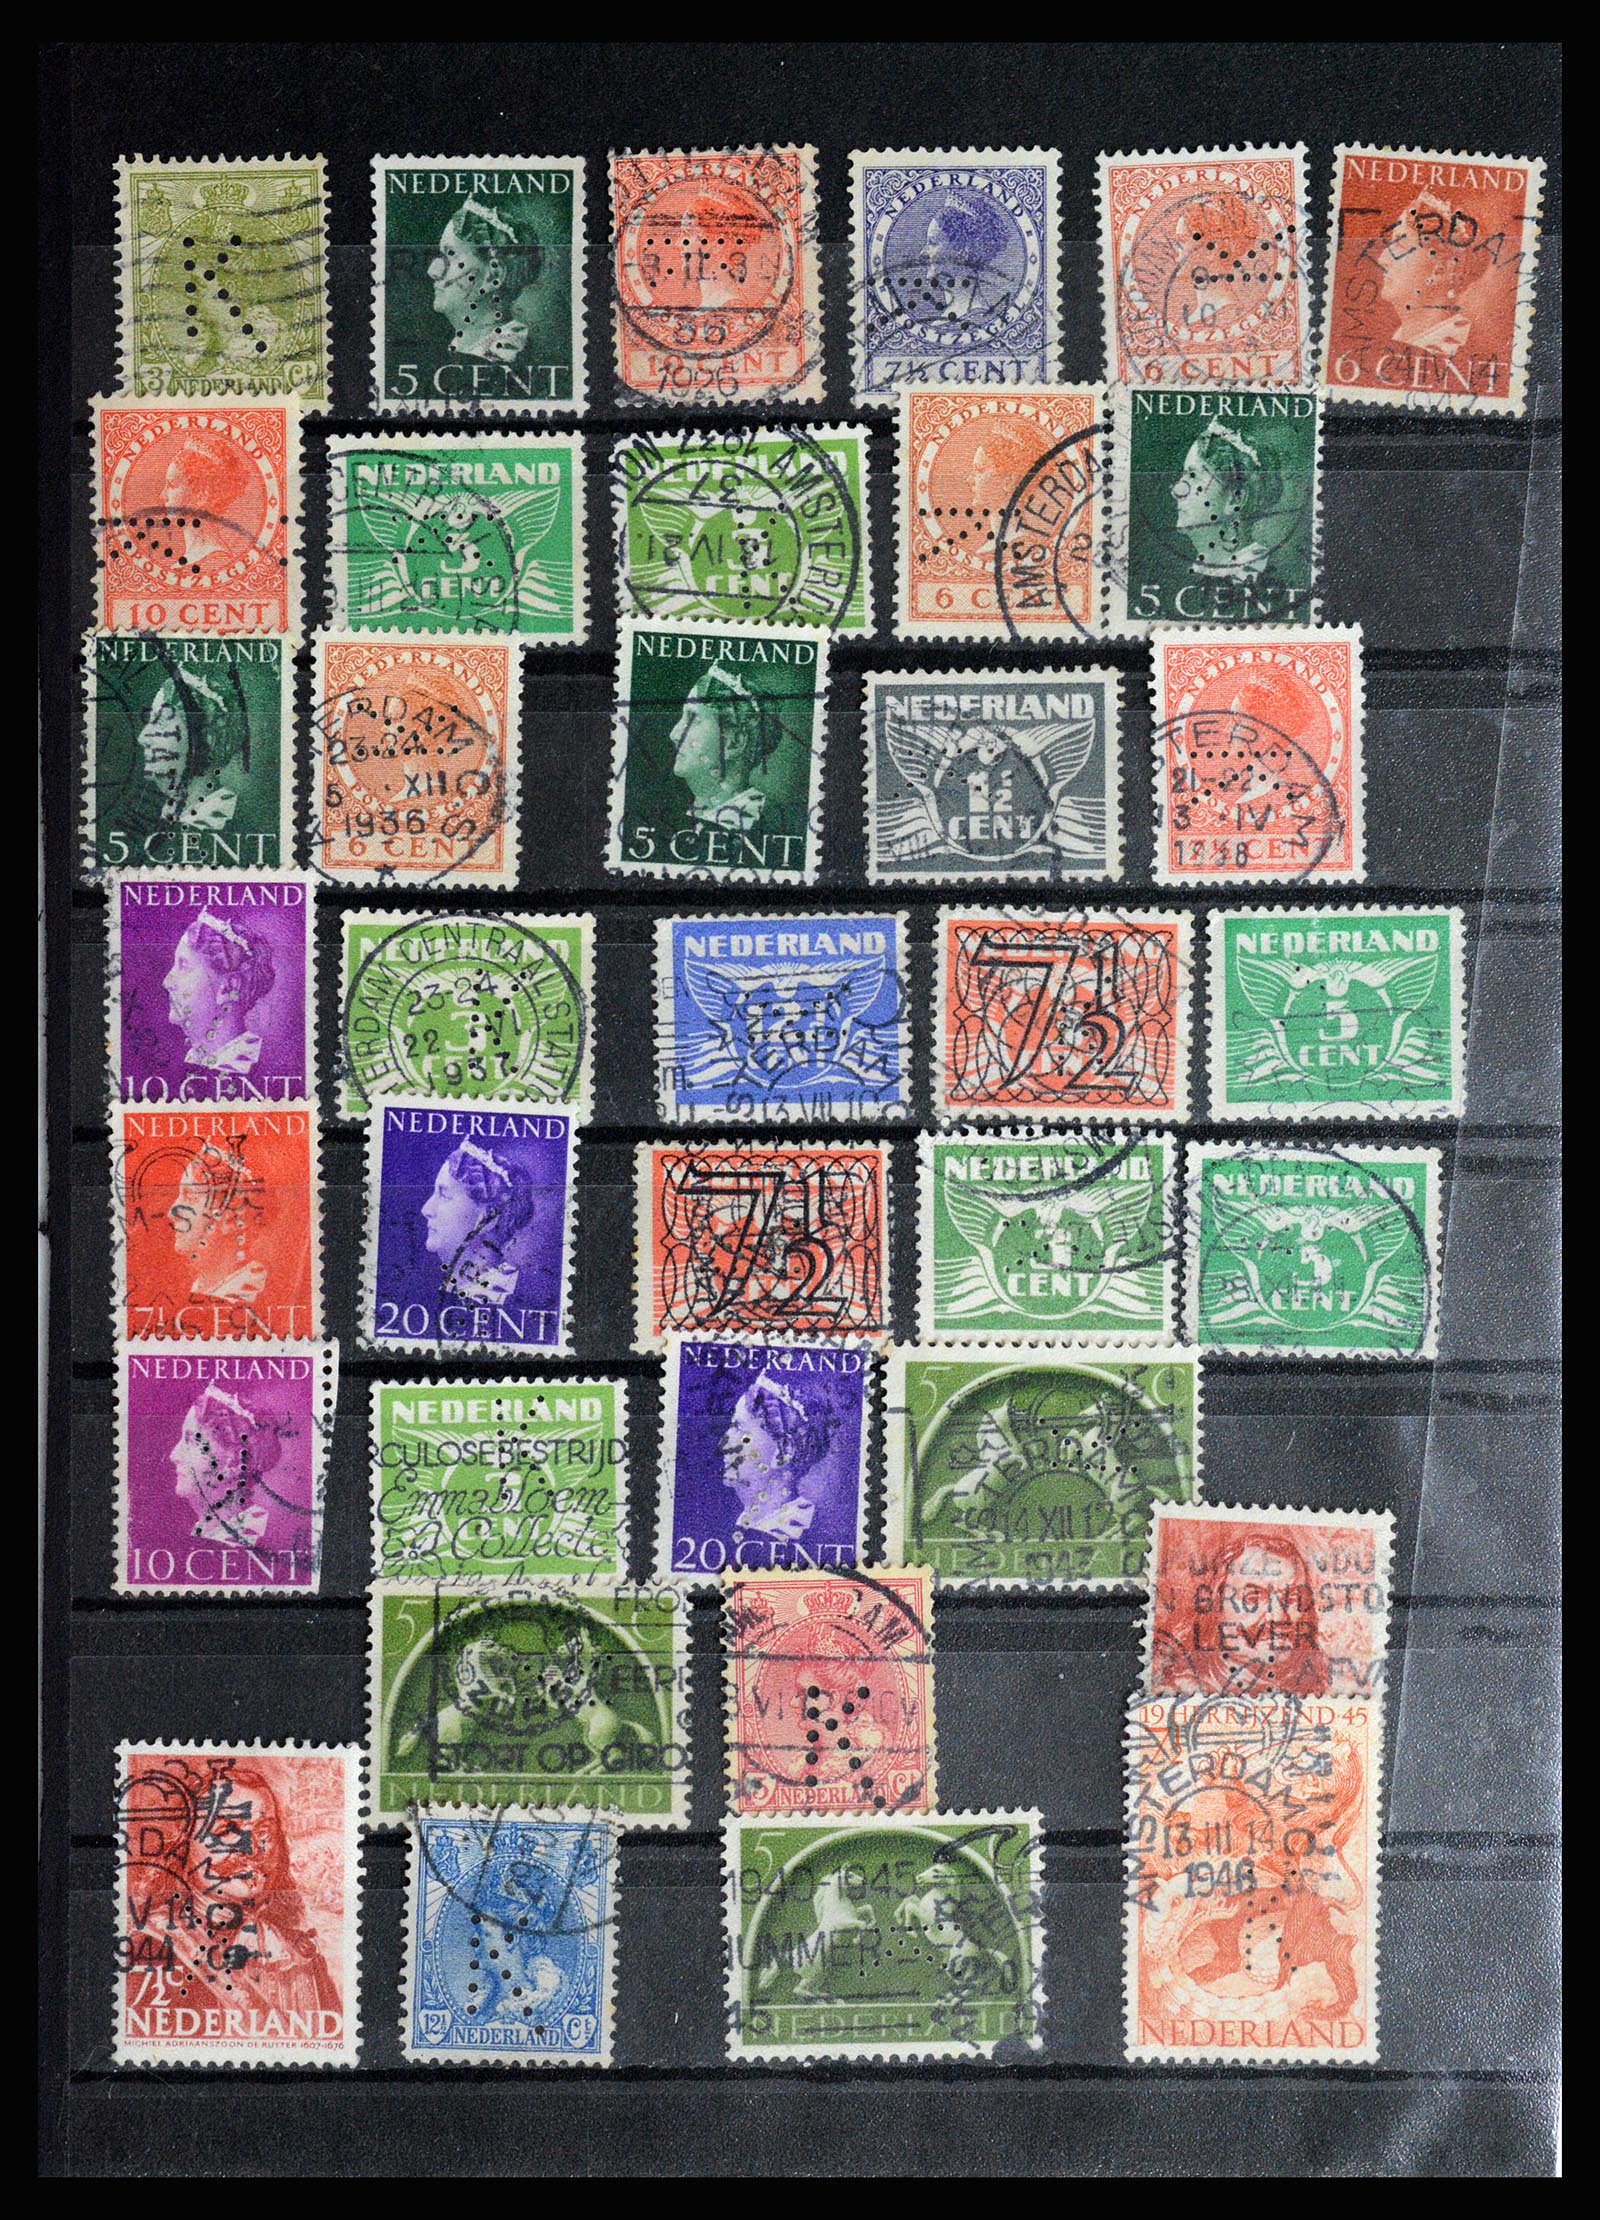 36849 011 - Stamp collection 36849 Netherlands perfins 1891-1960.